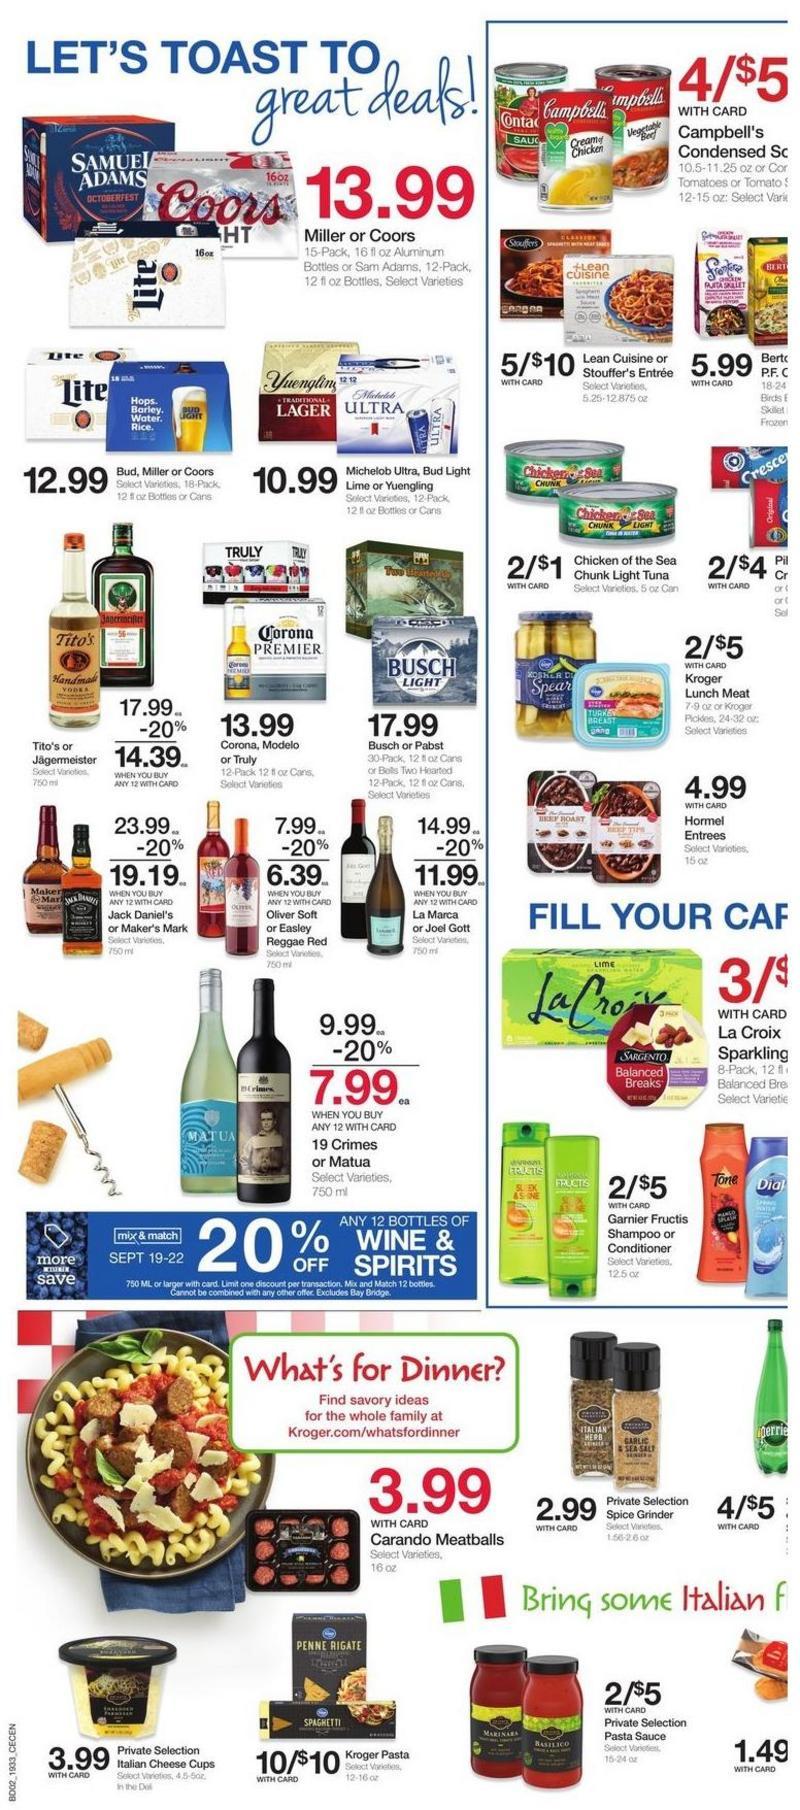 Kroger Weekly Ad from September 18